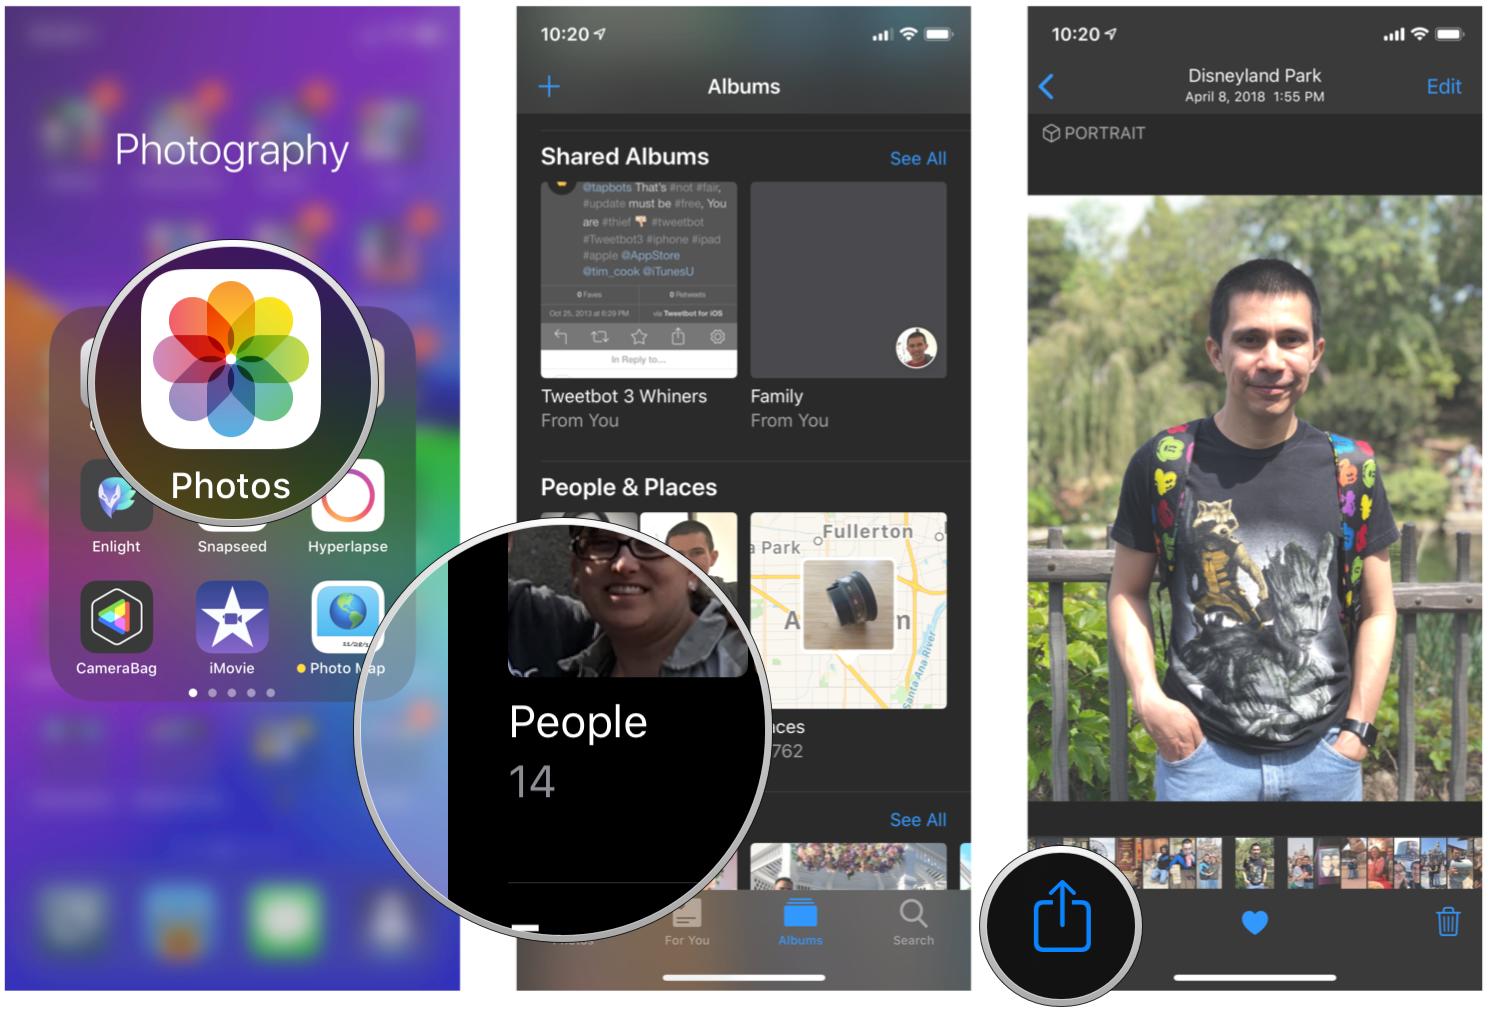 How To Use The Photos App To For Slideshows Setting Wallpaper And Contact Pics Imore